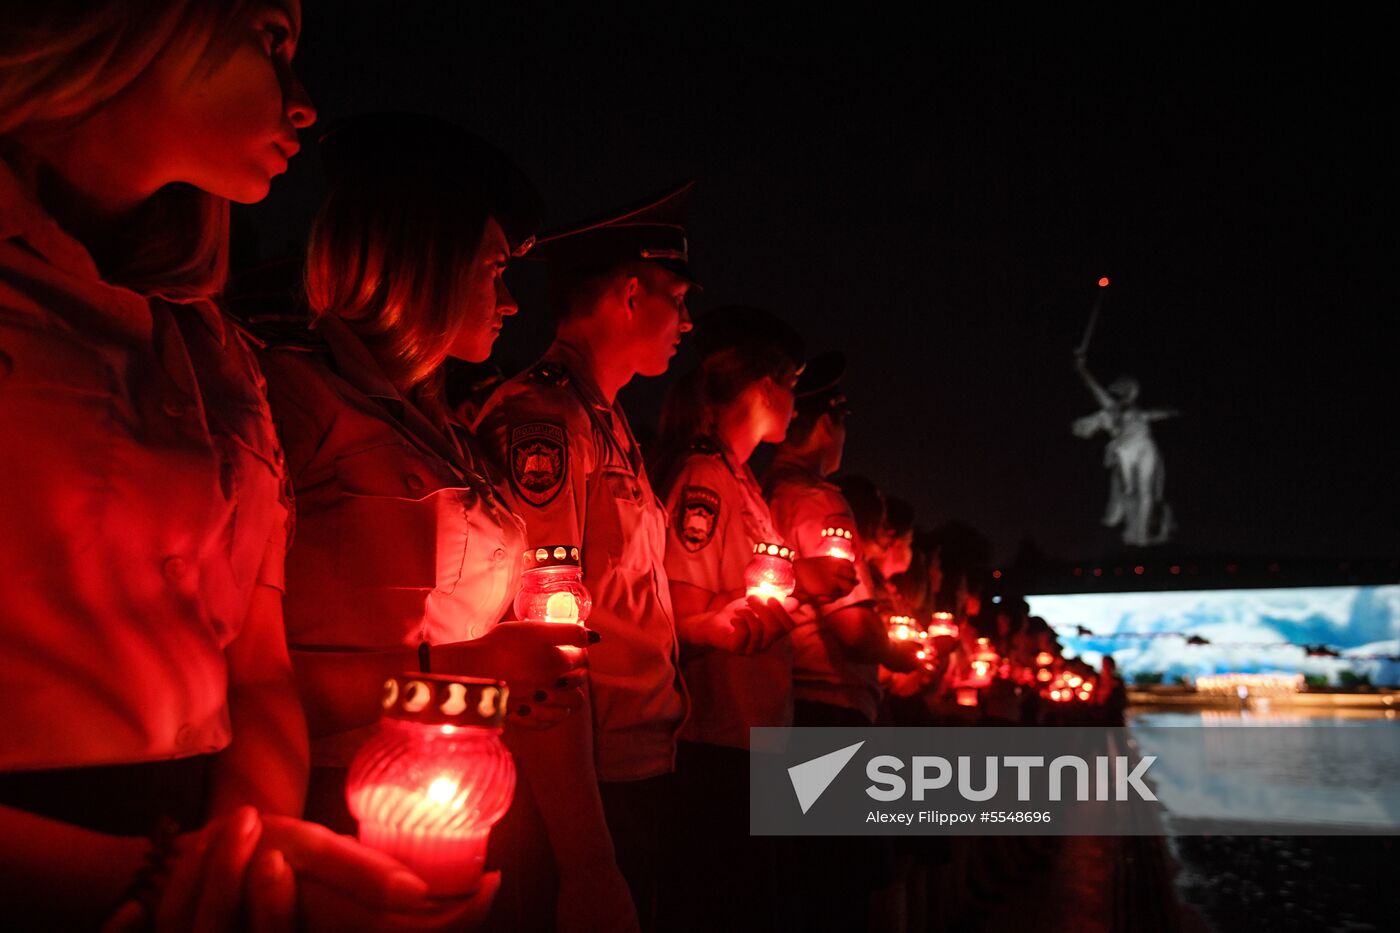 Commemorative events on 77th anniversary of beginning of Great Patriotic War